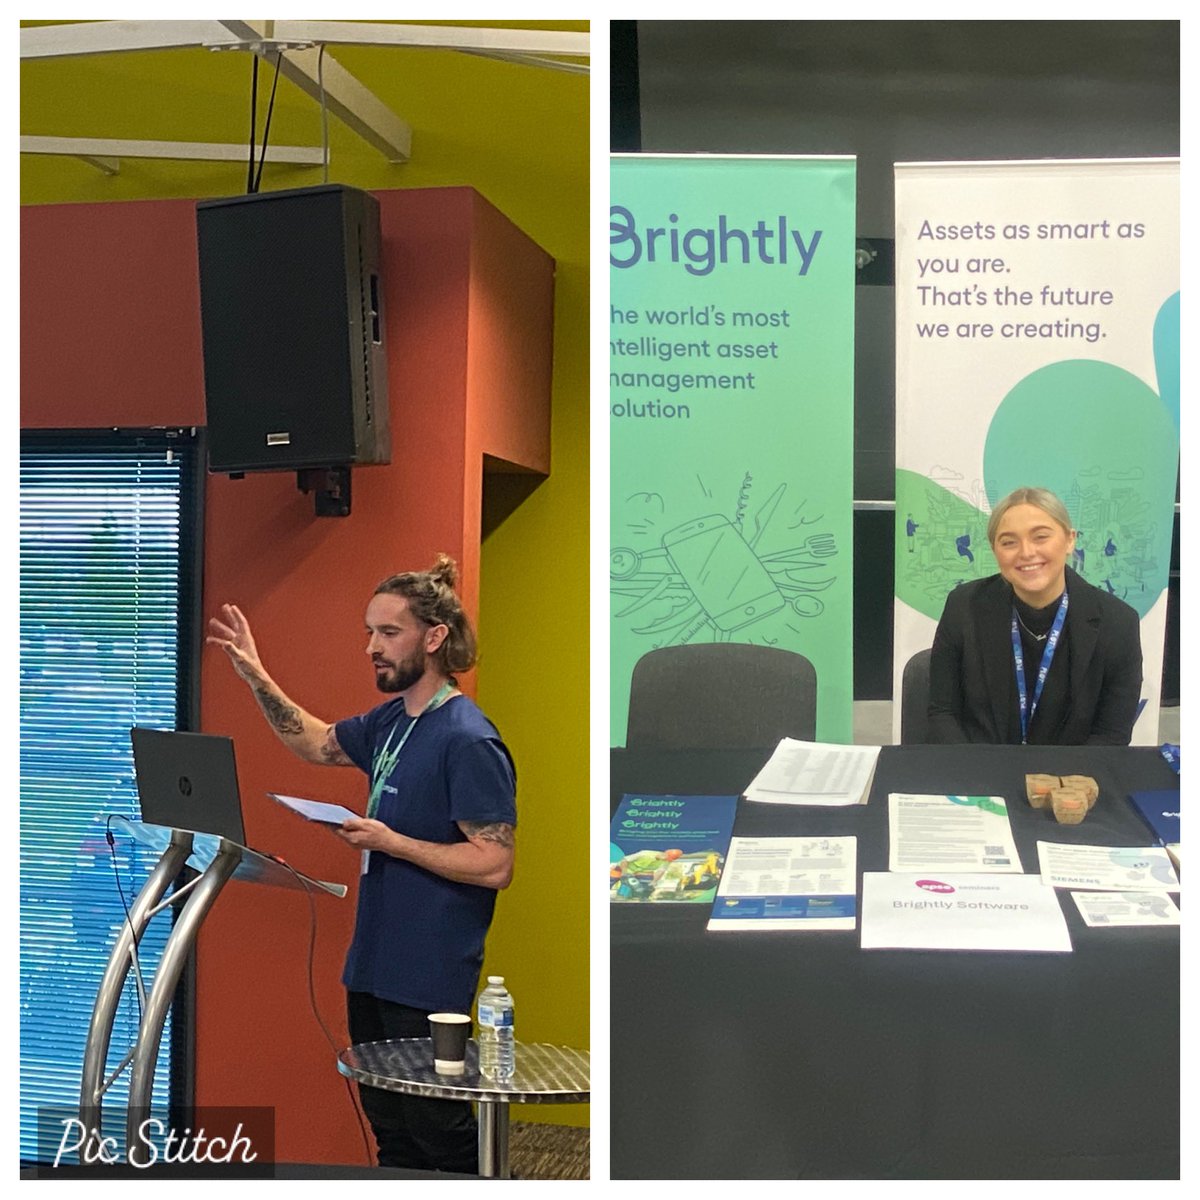 Thank you to our main sponsor Brightly! Visit their stand in the exhibition area and get your questions ready for Jack